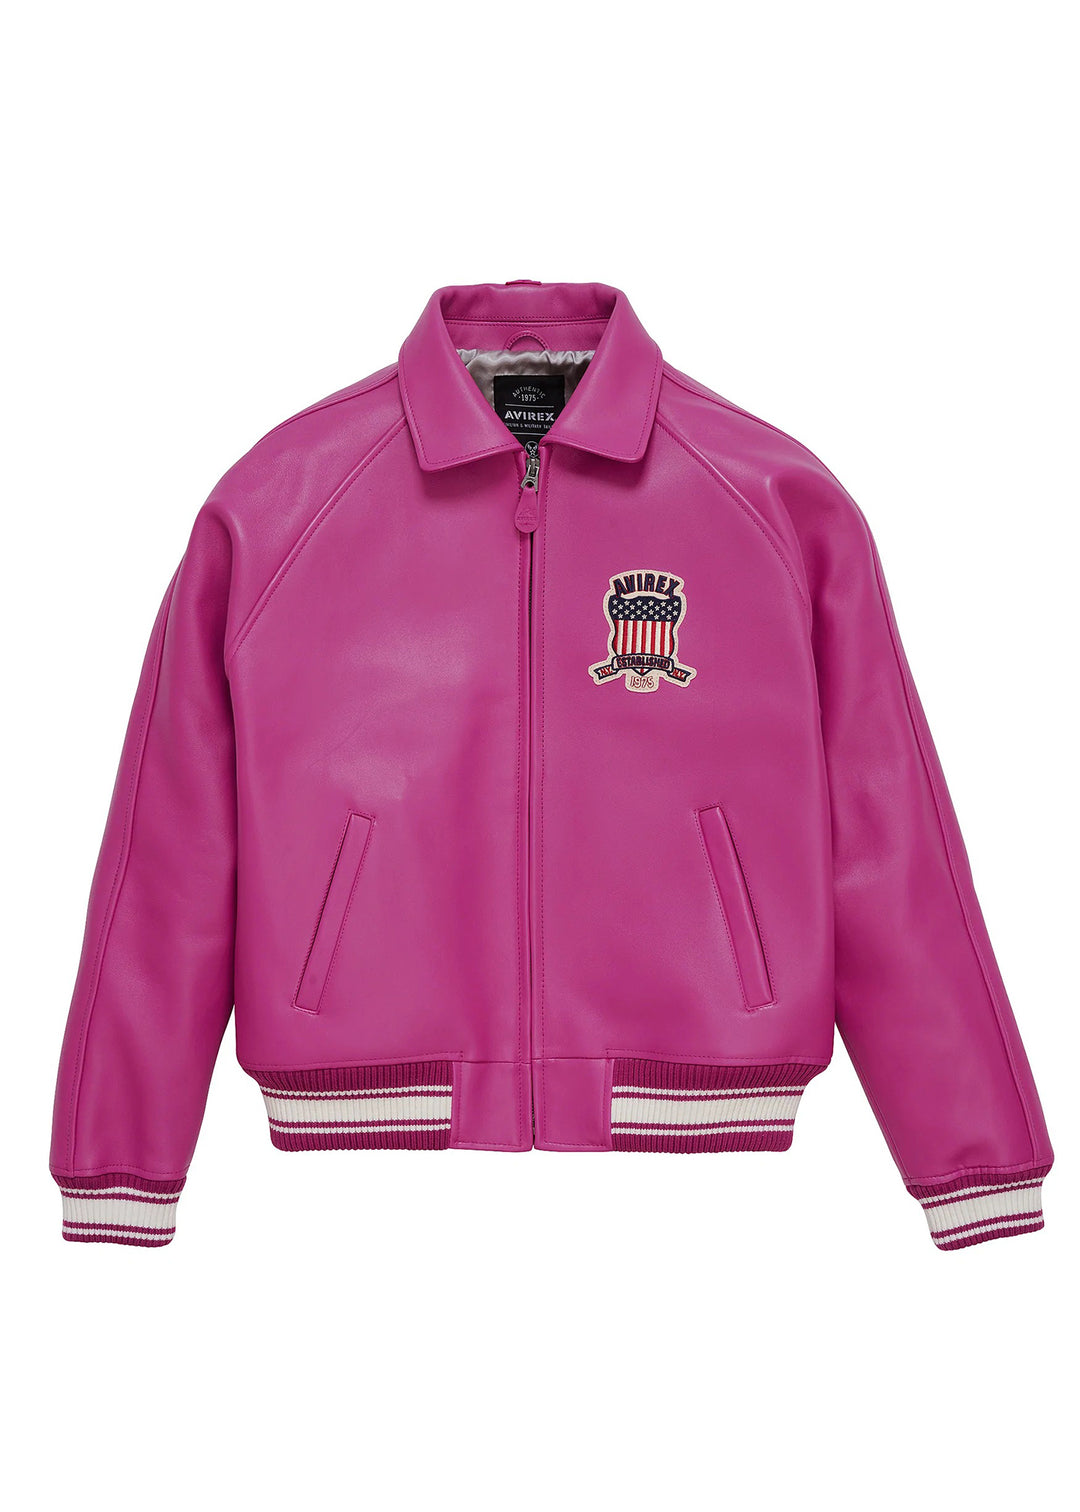 Avirex Icon leather jacket in Pink - video